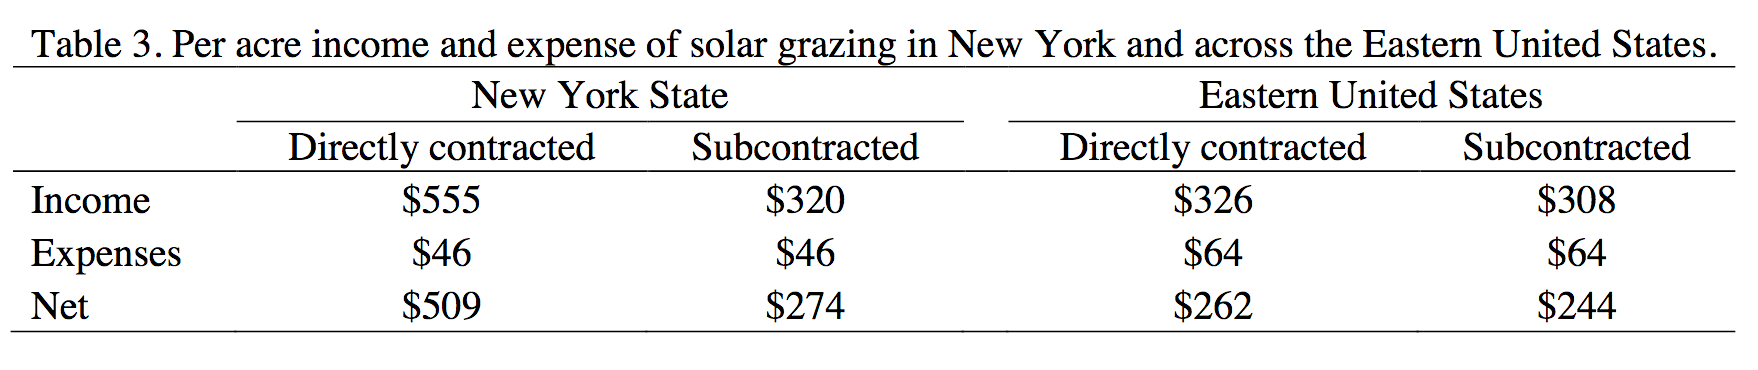 Table excerpted from the 2018 Atkinson Center report. In a survey of sheep farmers grazing solar sites, 14 total sheep farms responded, and of that 4 were in New York State. Survey respondents reported a total of 3,503 acres of utility solar grazed in the eastern US, with 79 acres in NYS.